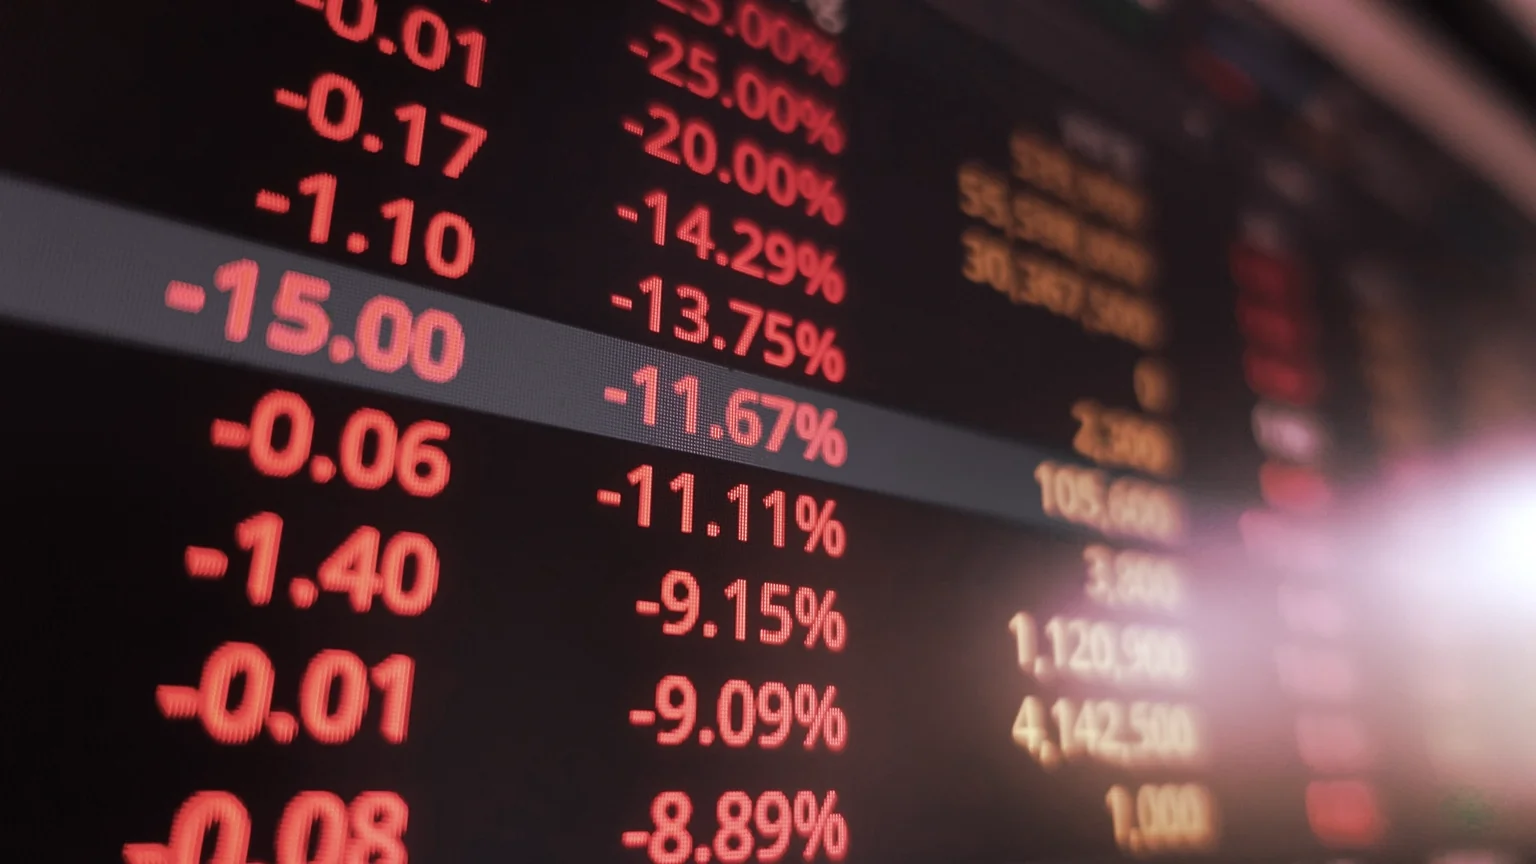 Markets in the red. Image: Shutterstock